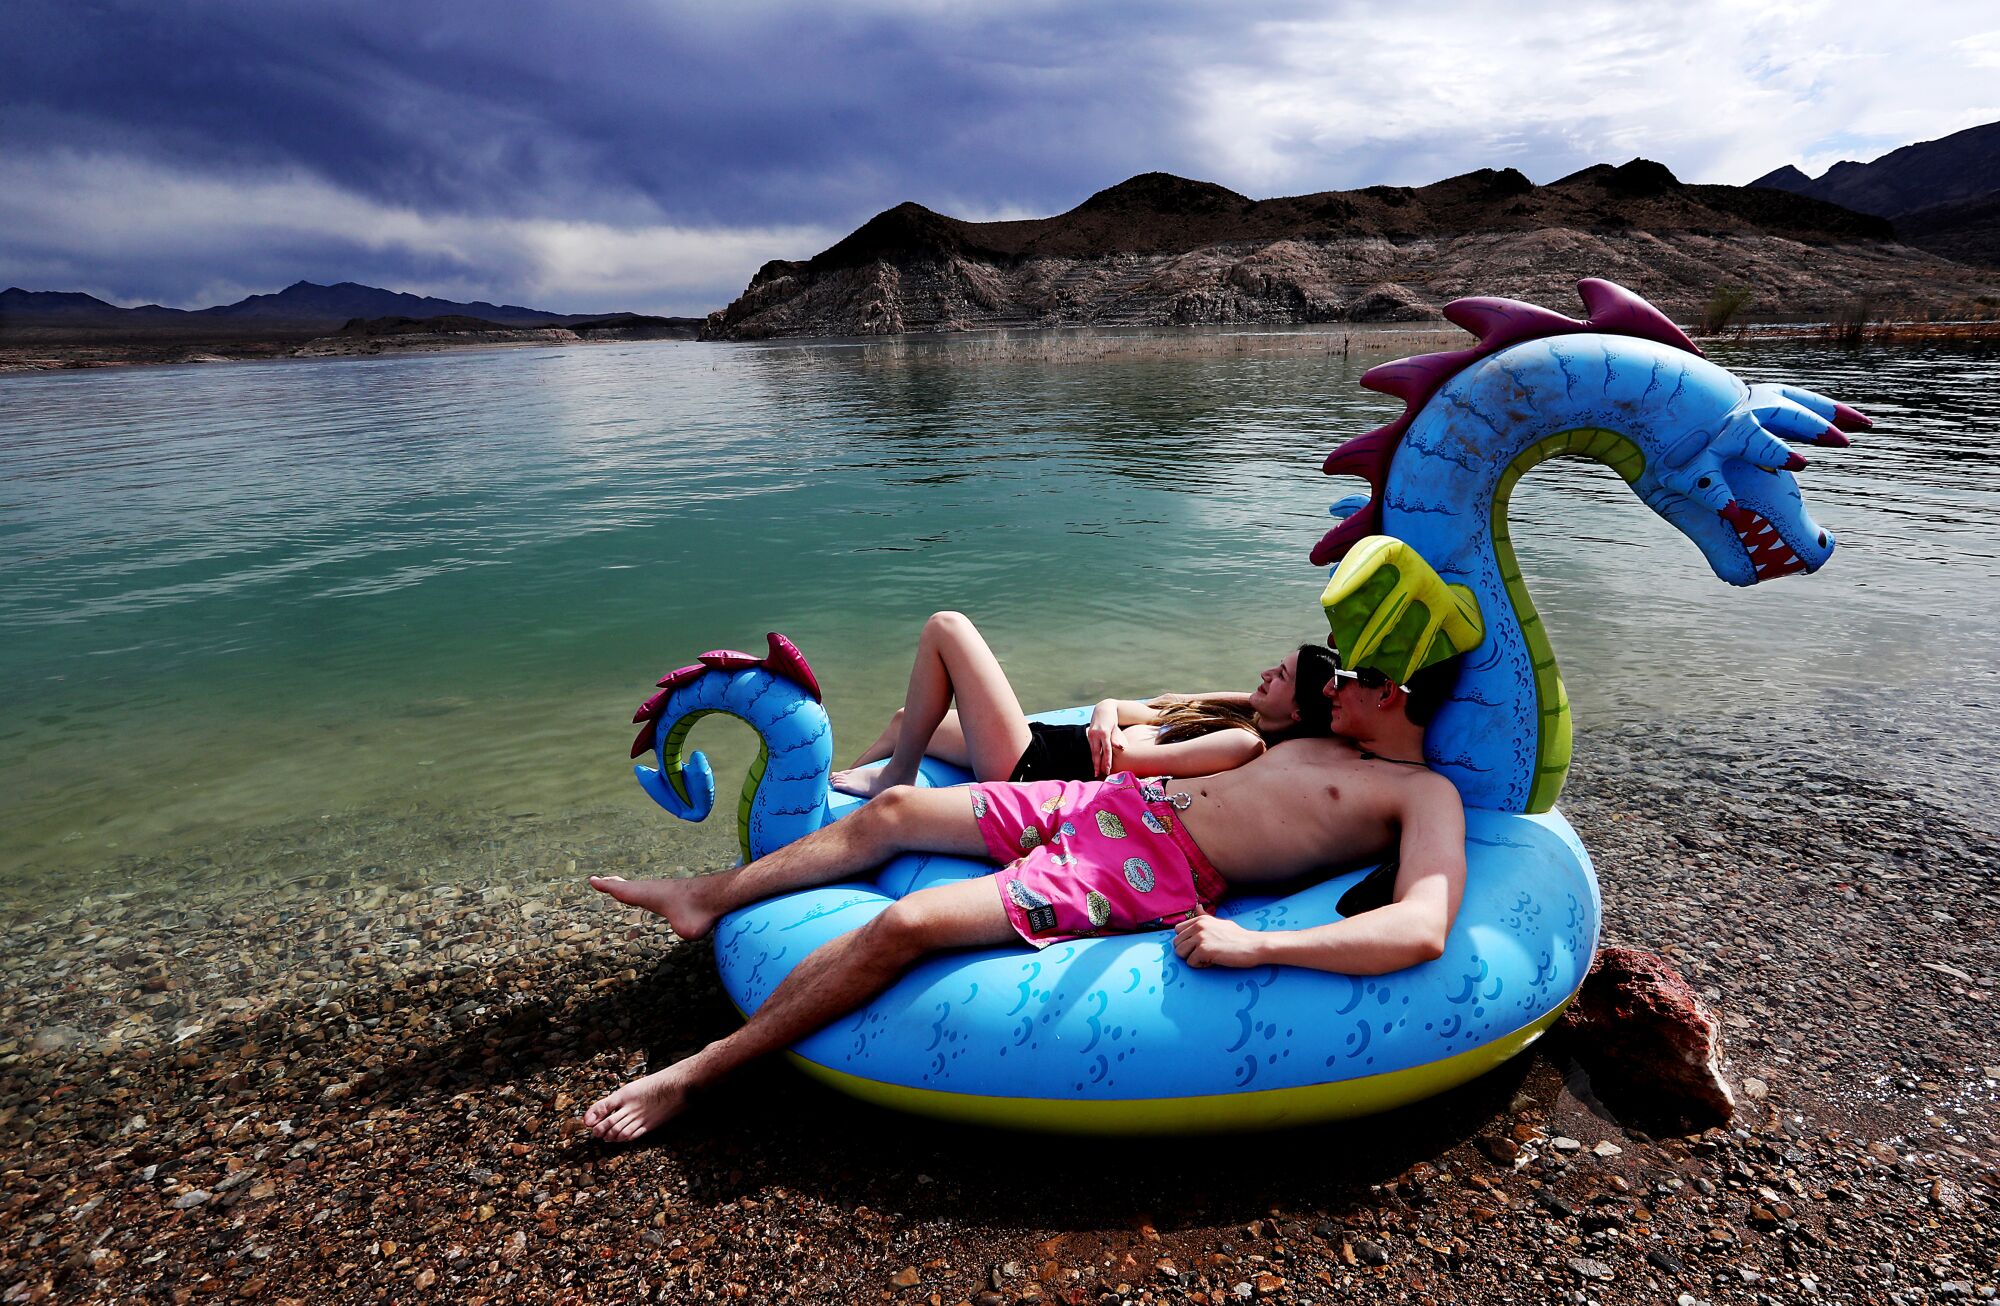 Storm clouds float across the sky but leave little rain as teens while away time on Lake Mead.